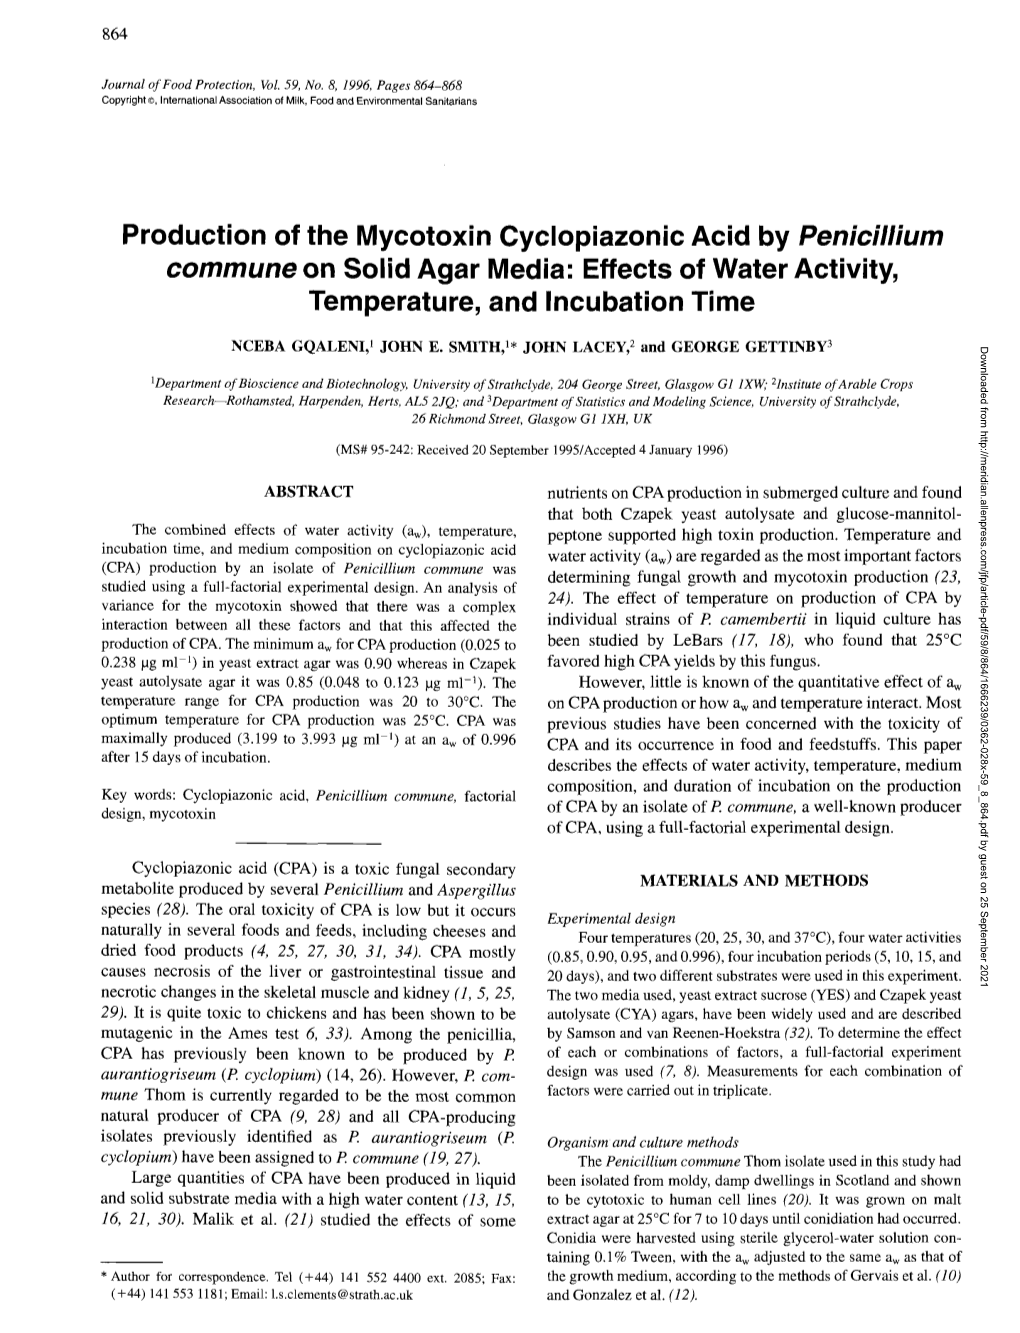 Production of the Mycotoxin Cyclopiazonic Acid by &lt;I